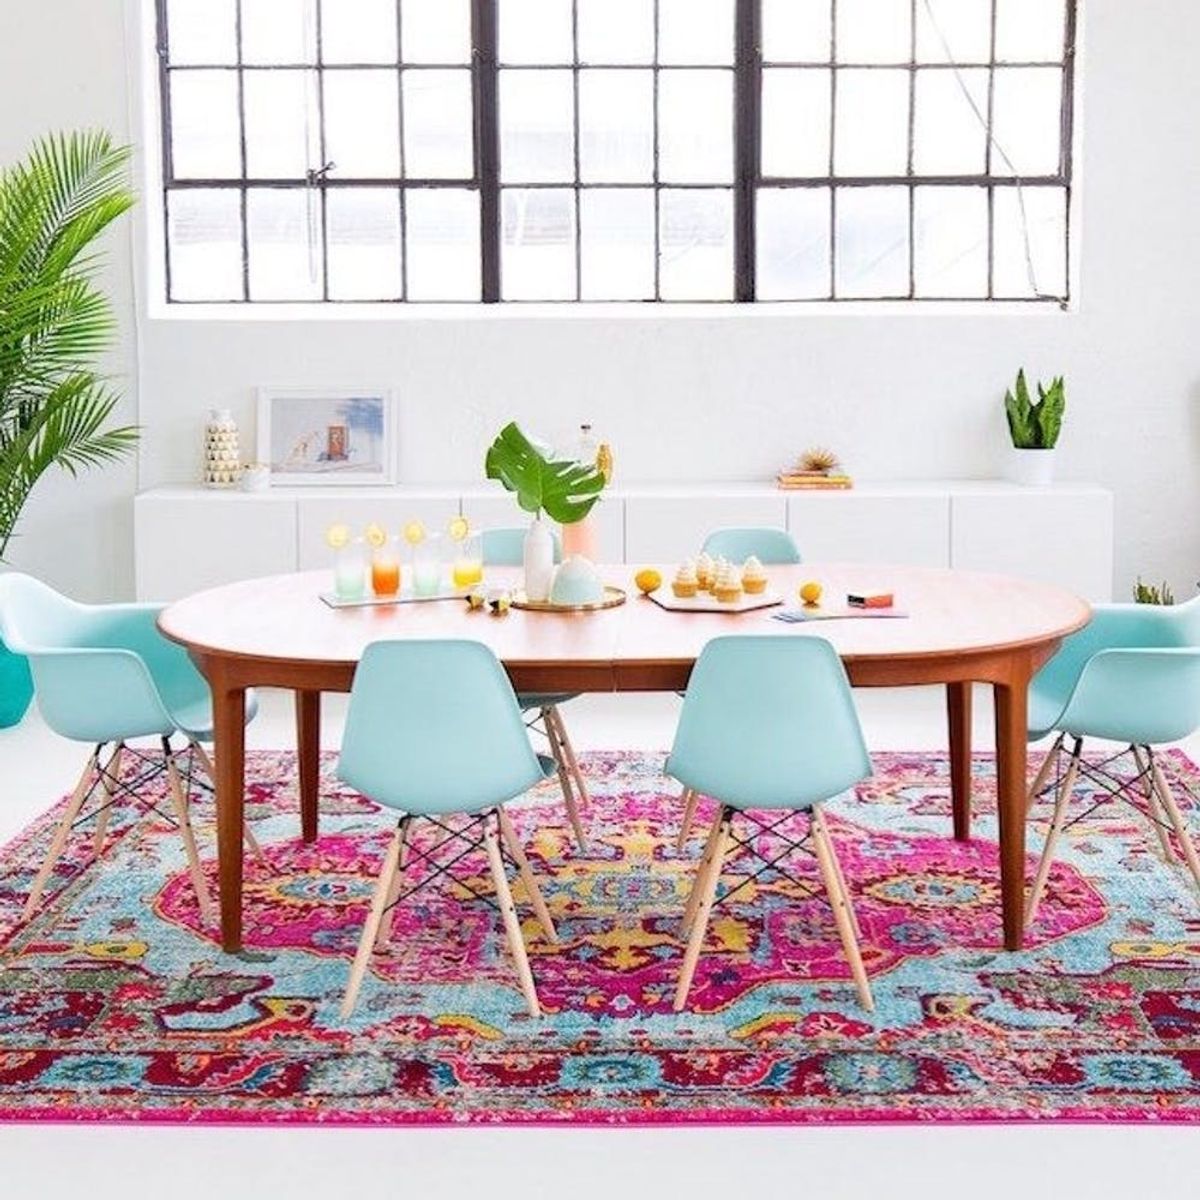 Pantone’s 2018 Home Decor Trend Forecast Has Some Serious Eye Candy